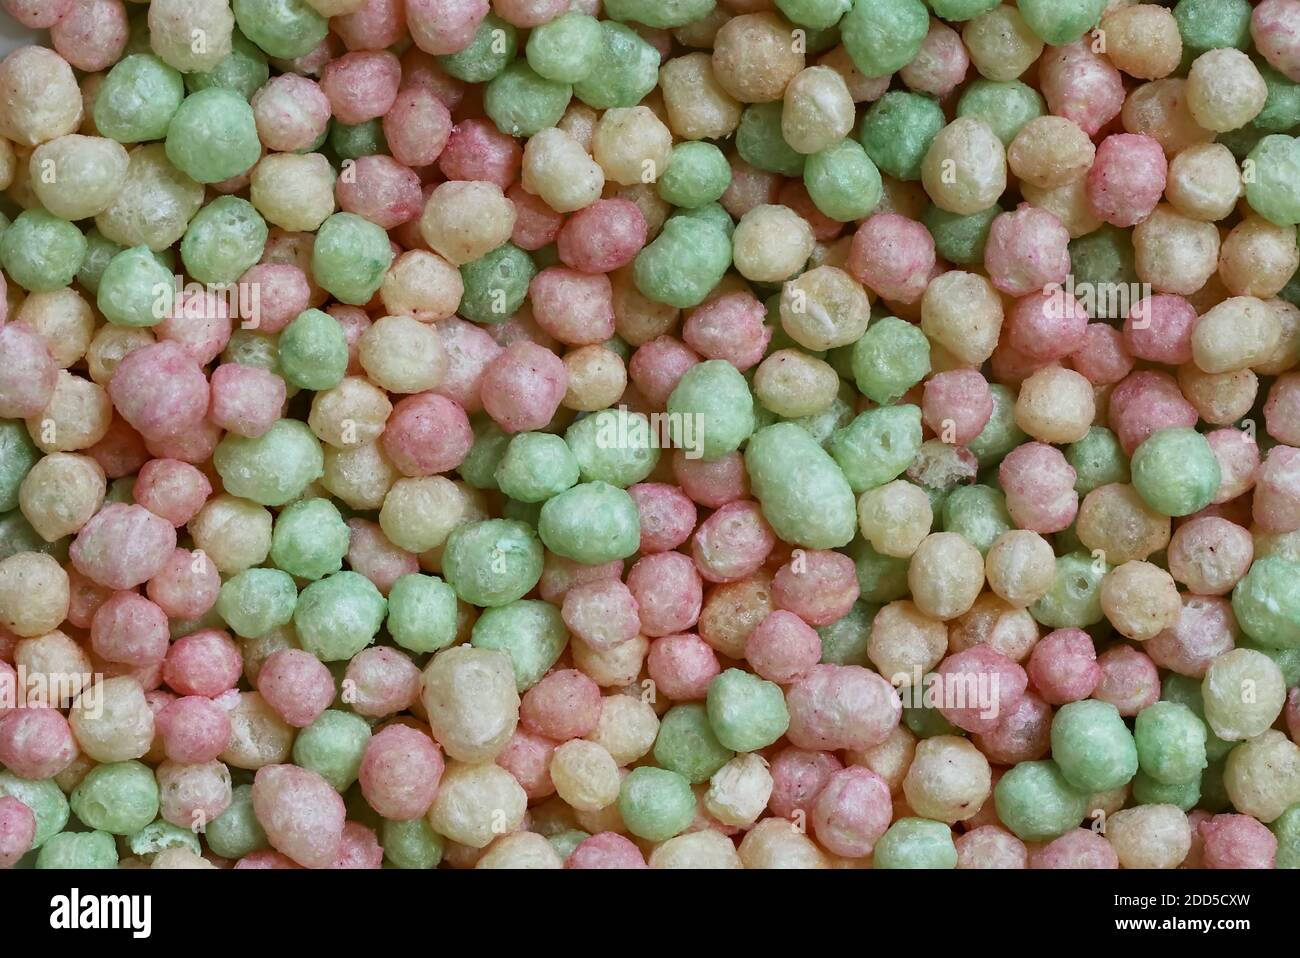 colorful sweet corn rice as background pattern Stock Photo